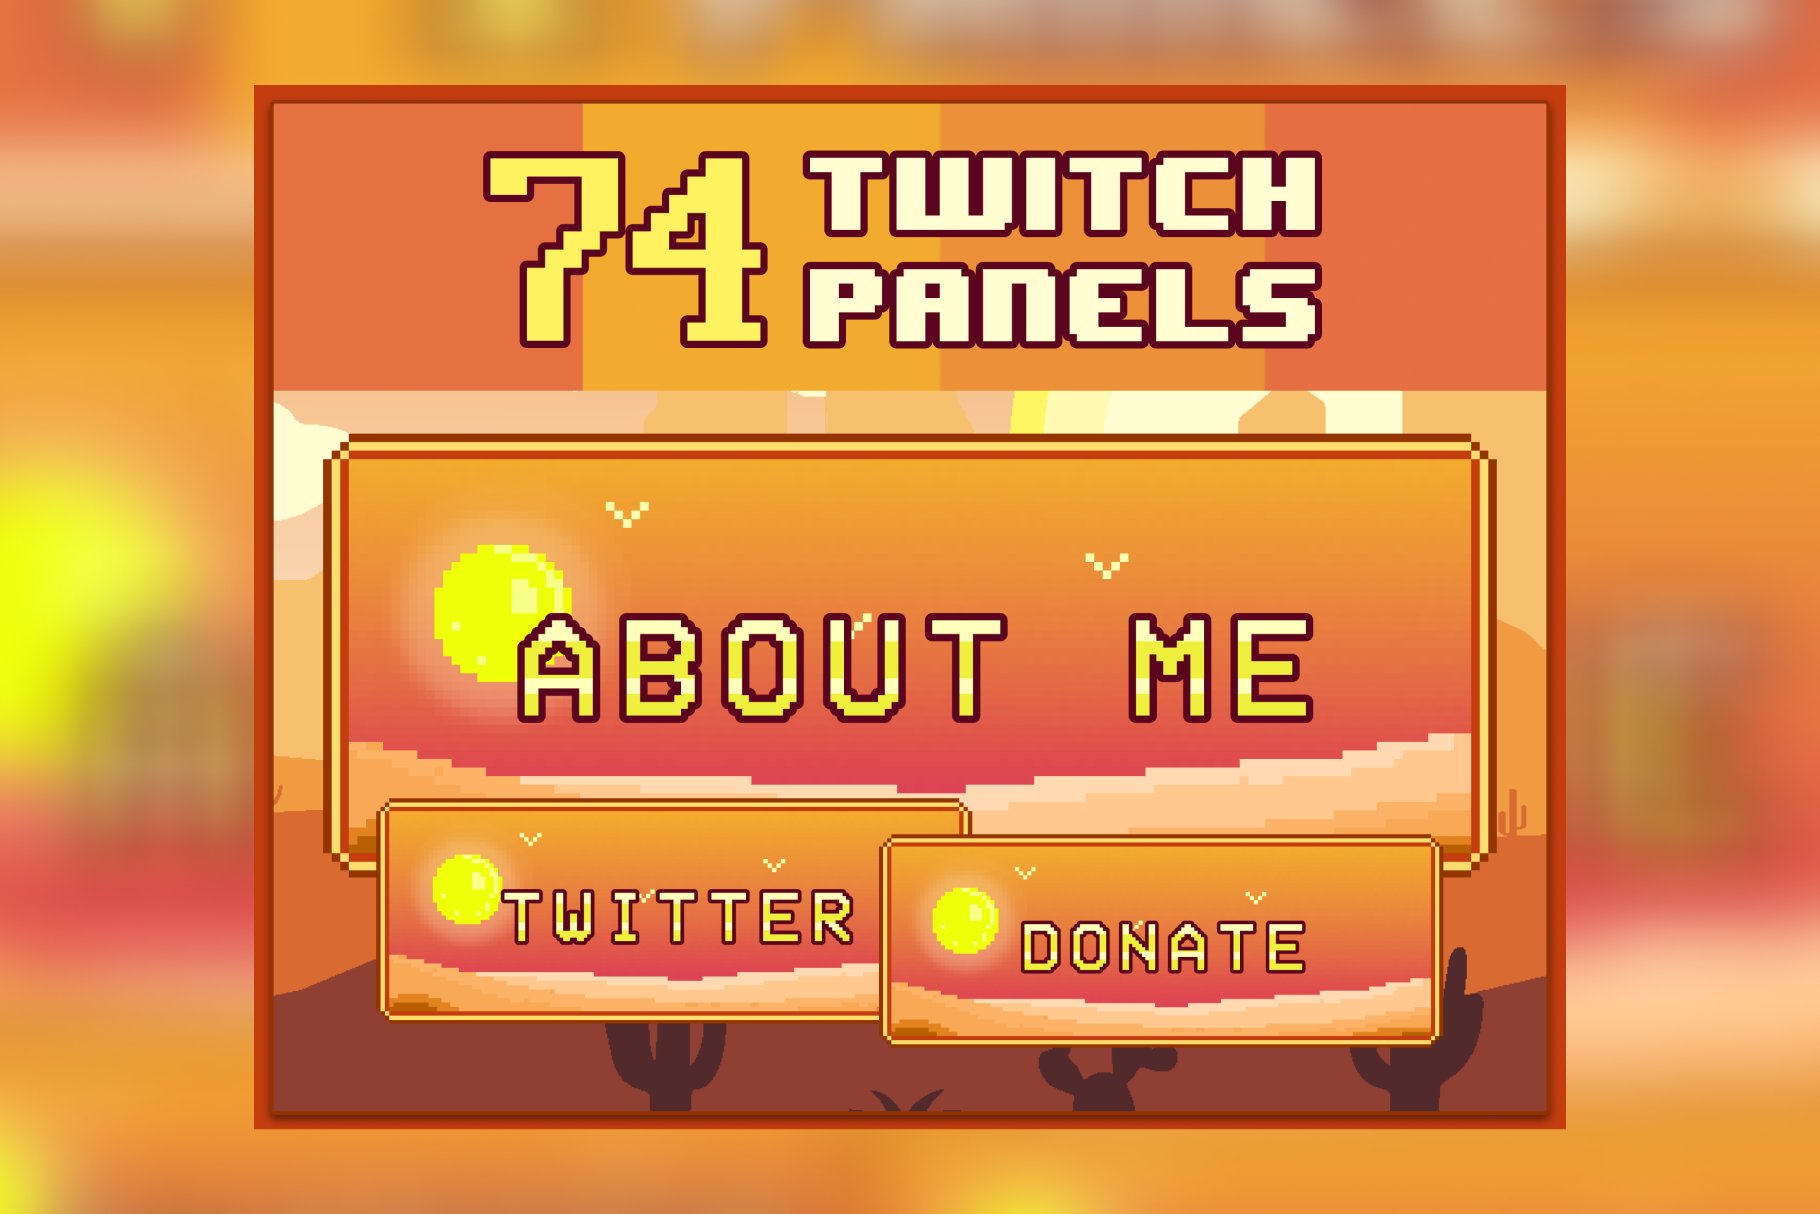 74x Desert Pixel Panels for Twitch cover image.